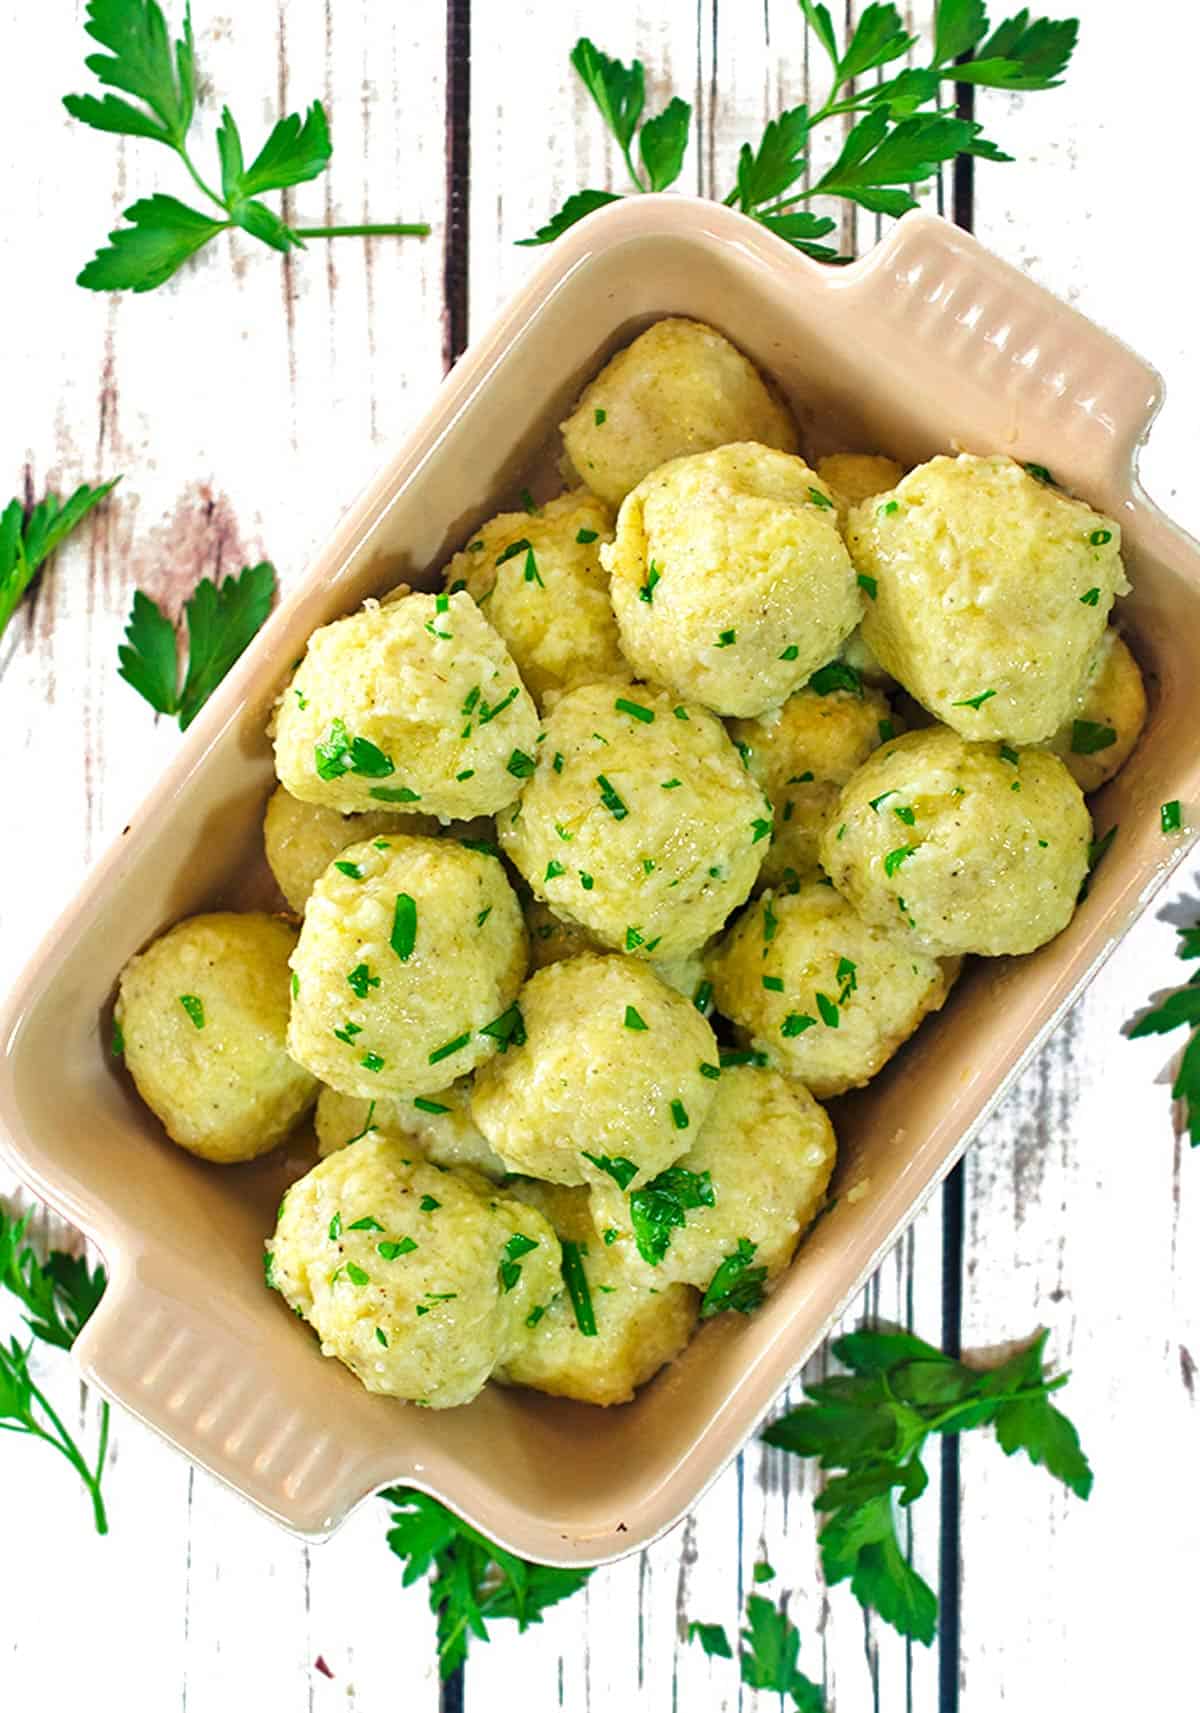 overhead view of a serving dish containing potato dumplings with Italian parsley garnish.